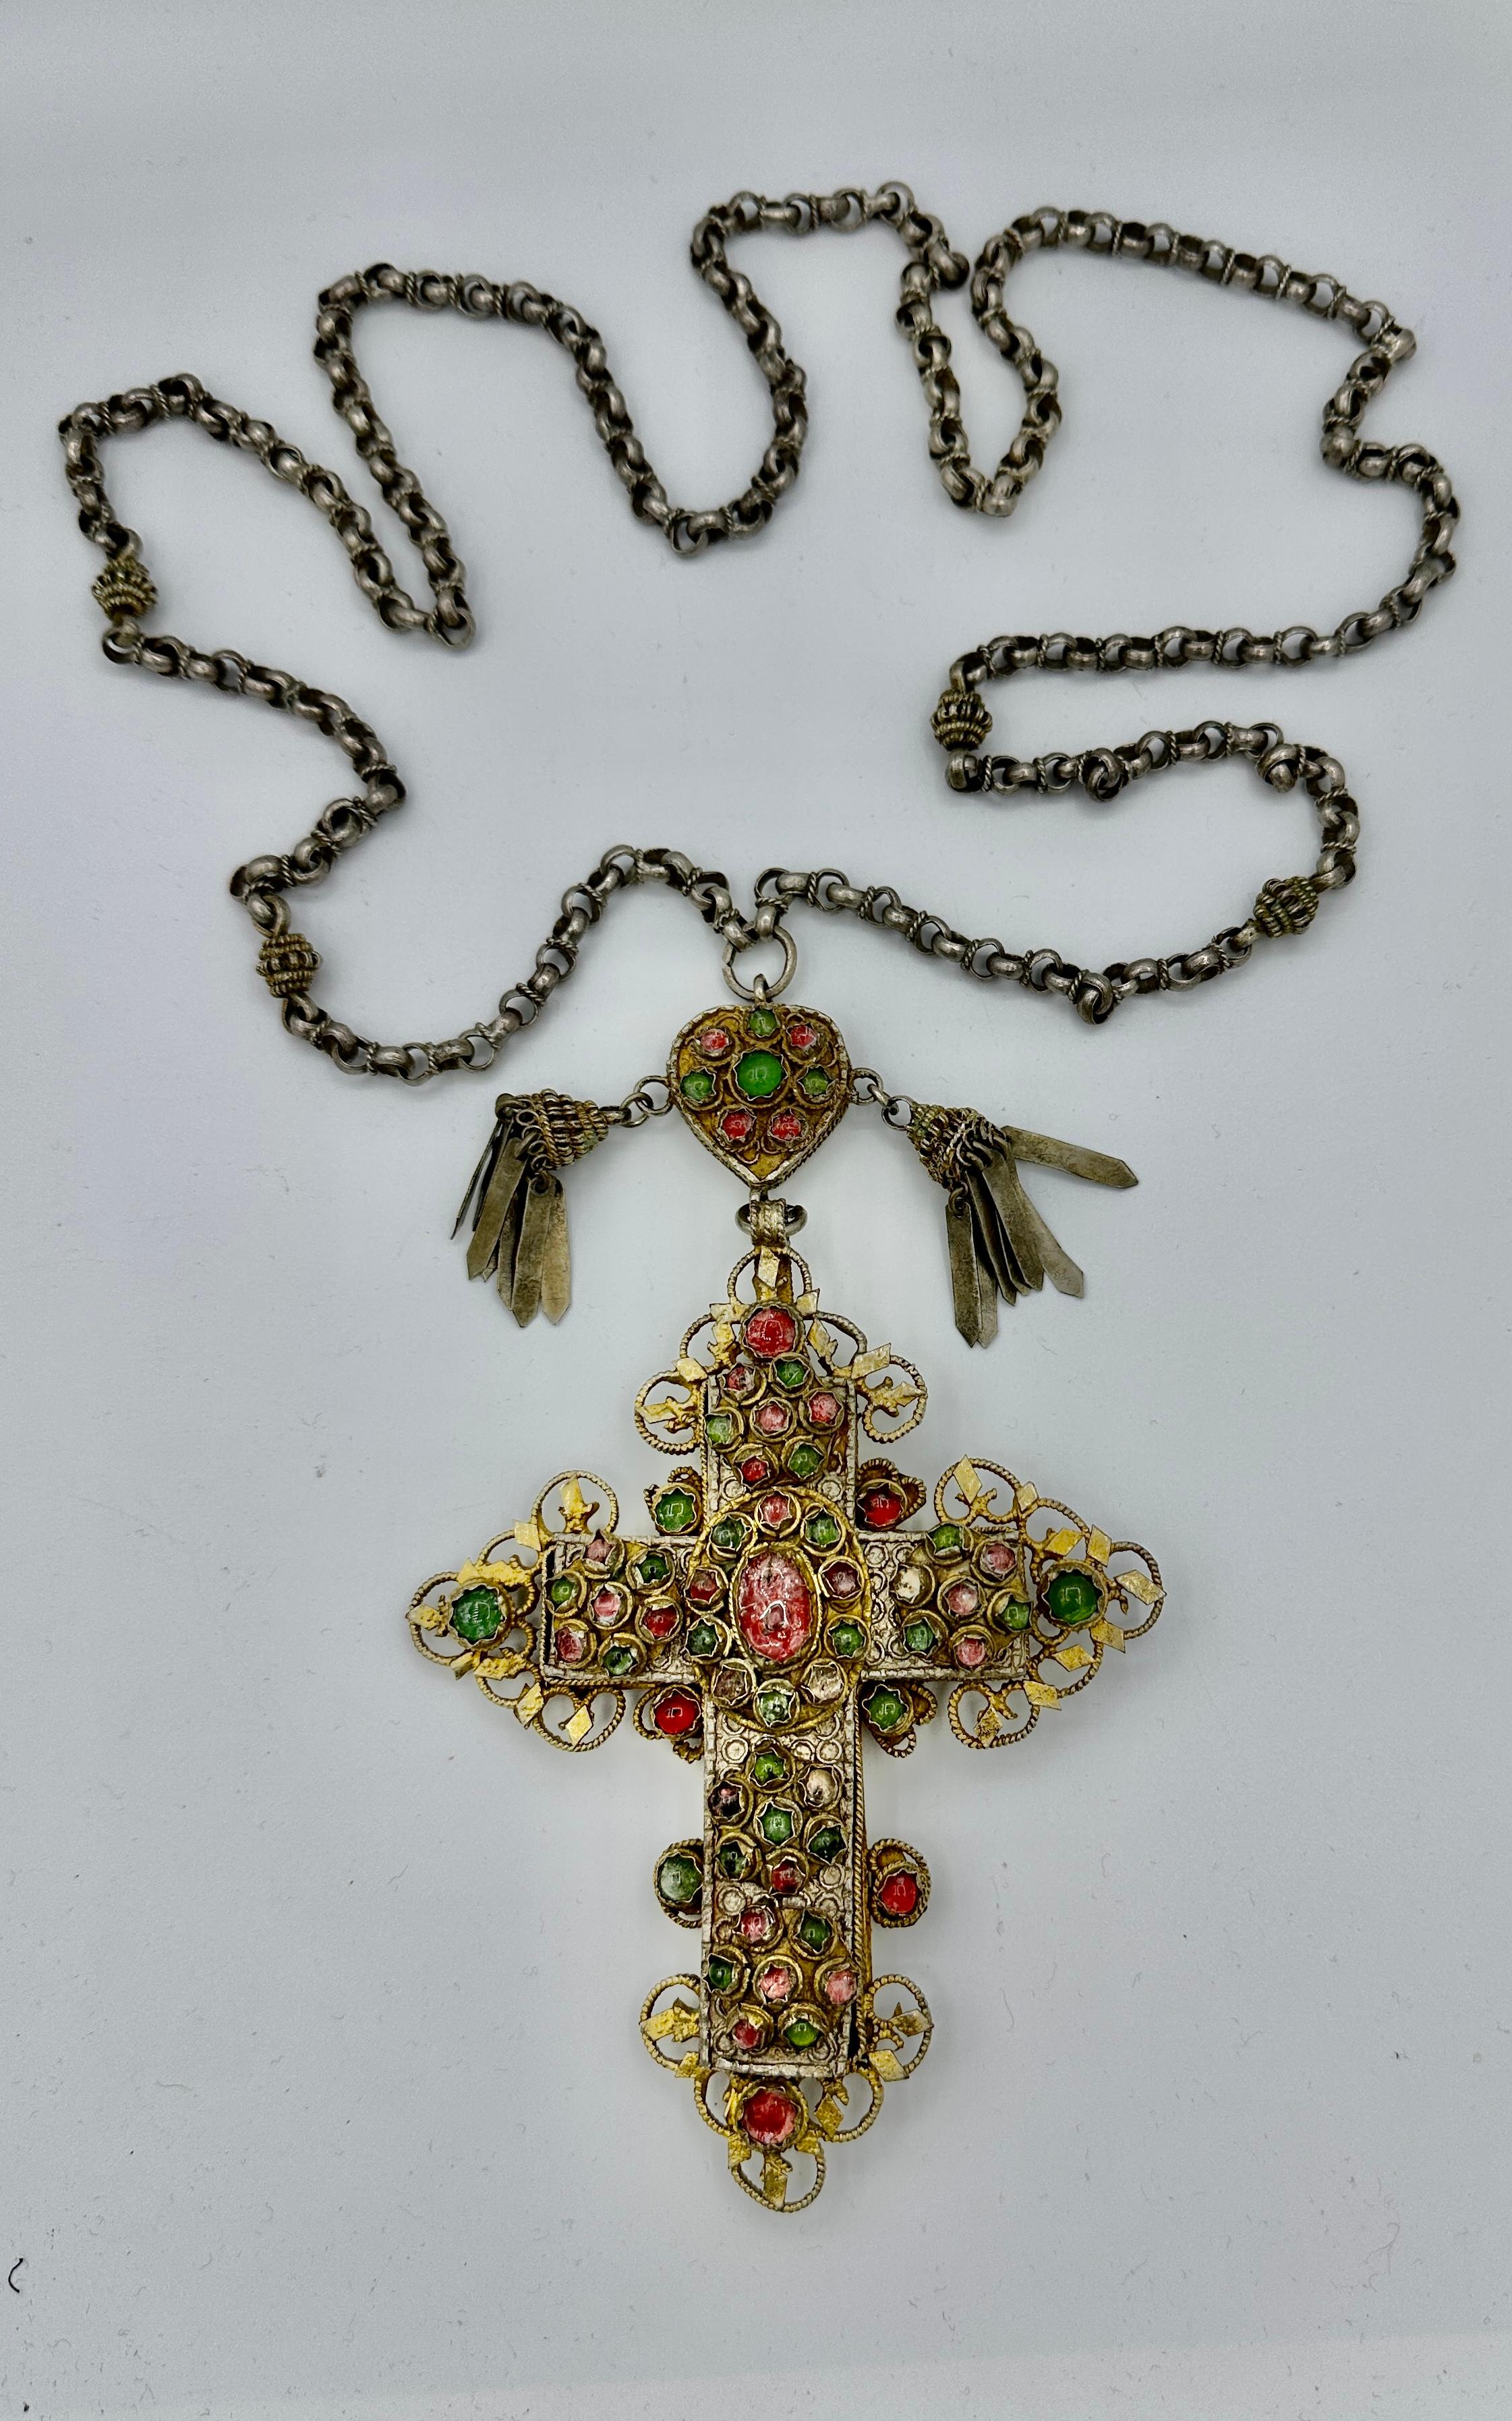 Indulge in a magnificent Museum Quality Antique Jeweled Orthodox Bishop Cross Necklace.  The extraordinary necklace features a 7 inch pendant of a bejeweled cross in Silver-Gilt with a Heart motif at the top adorned with pendant tassels. 
The heart